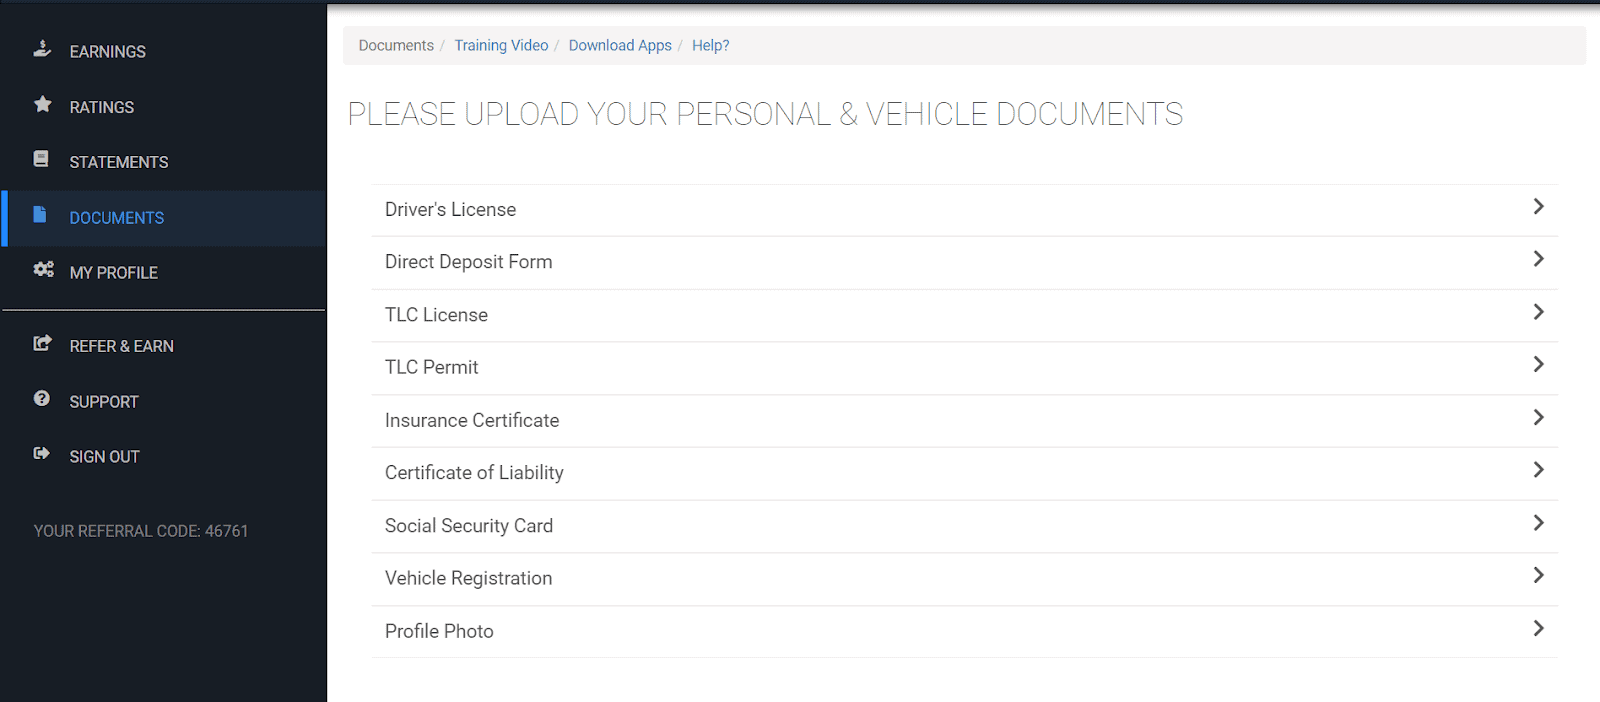 Upload personal and vehicle documents